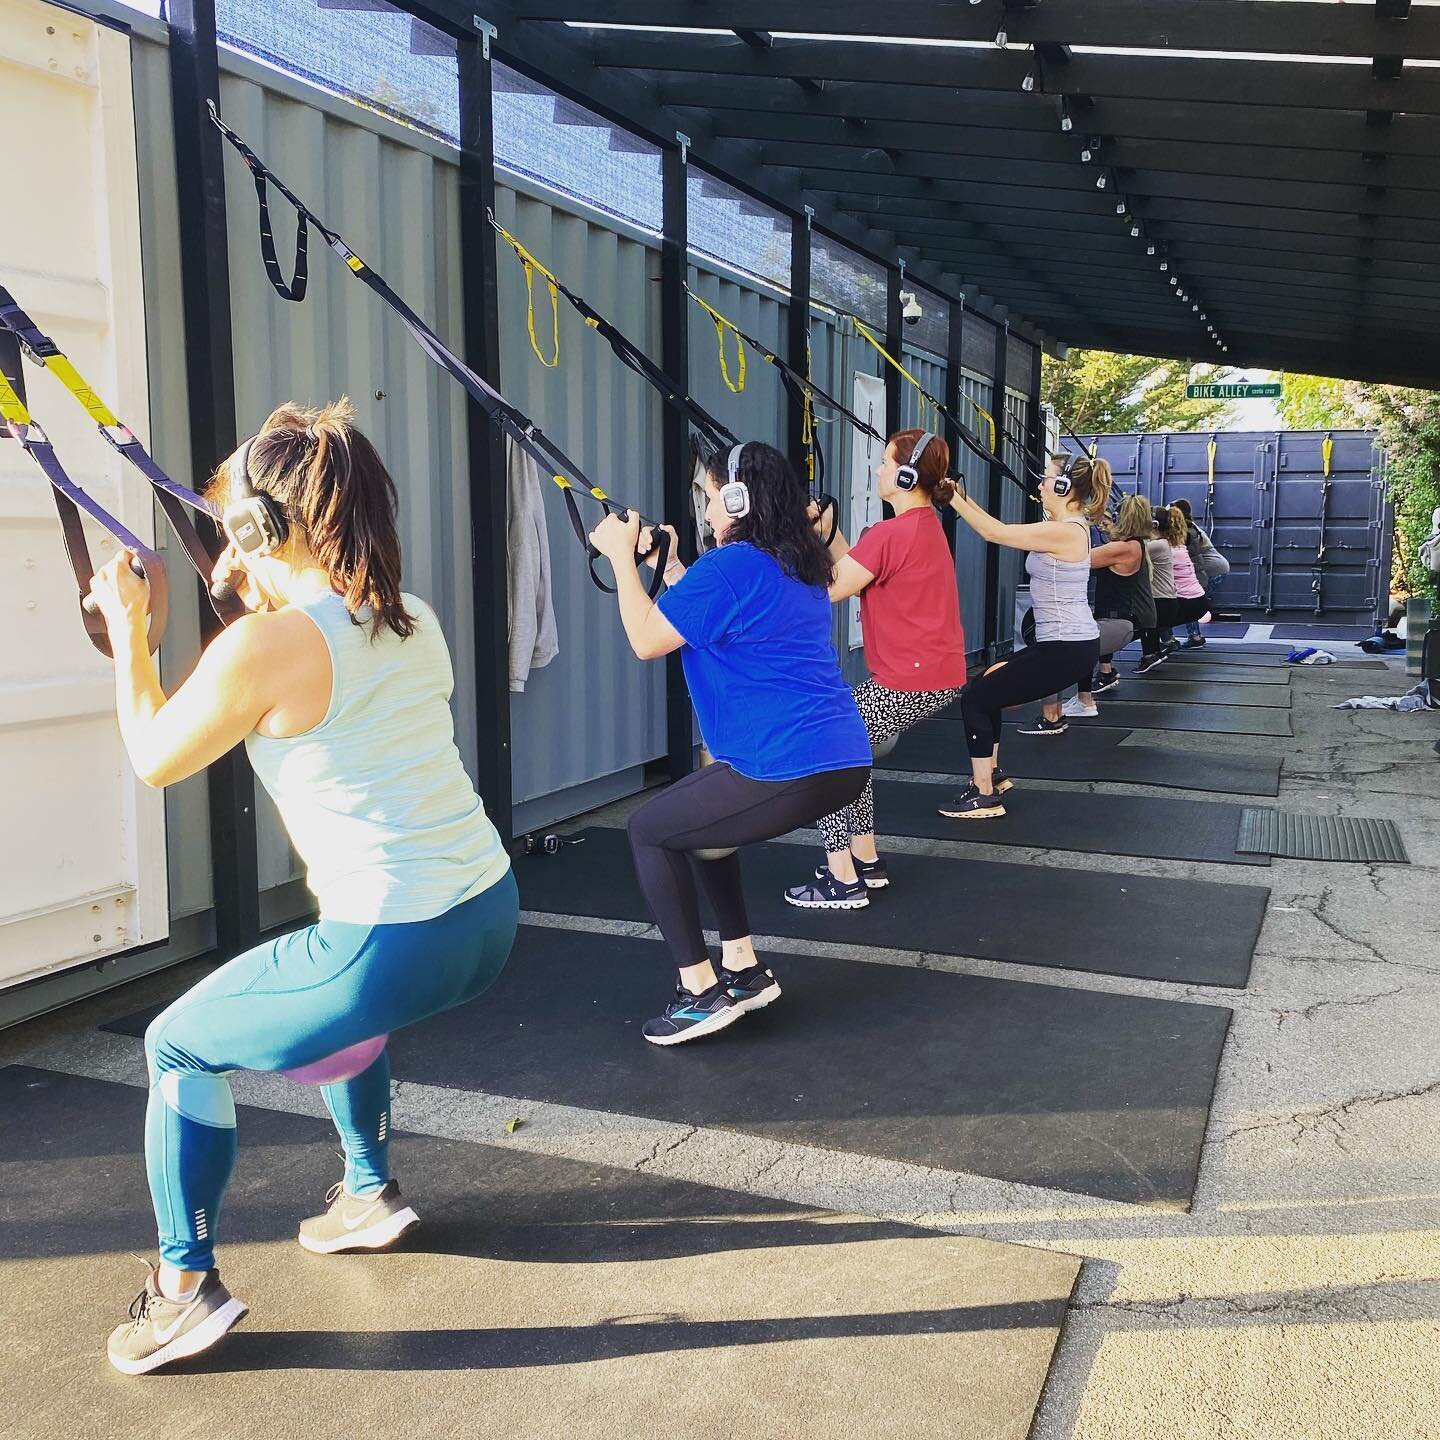 Getting your workout done early sets you up for a better day!
Added bonus at GOAT: sunshine, fresh air and laughs with your training friends!
Photo: 6:30a TRX (Thursdays)